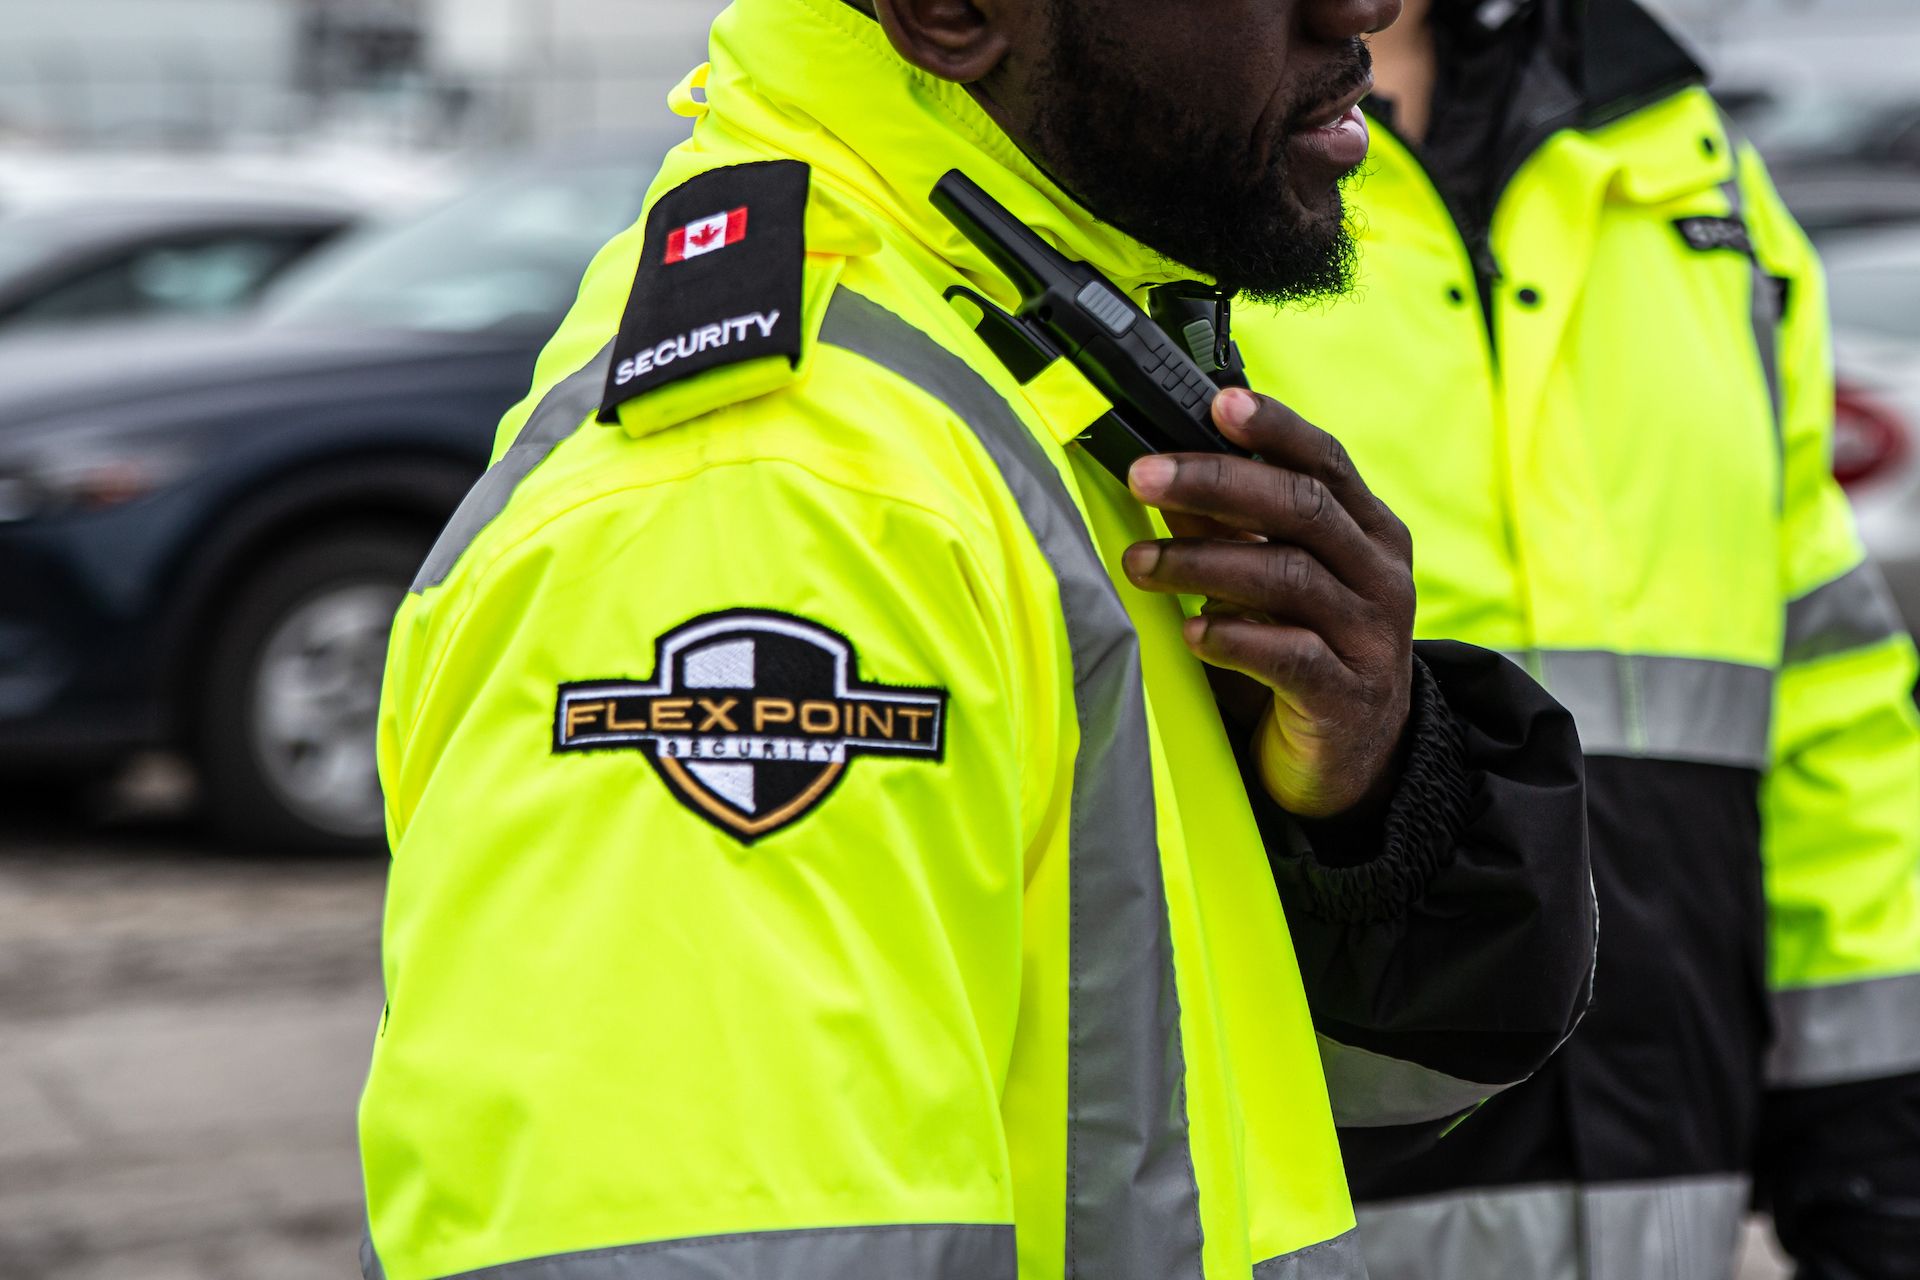 Close up of a Flex Point Security guard wearing a branded yellow Flex Point Security jacket reaching for the walkie talkie on his shoulder